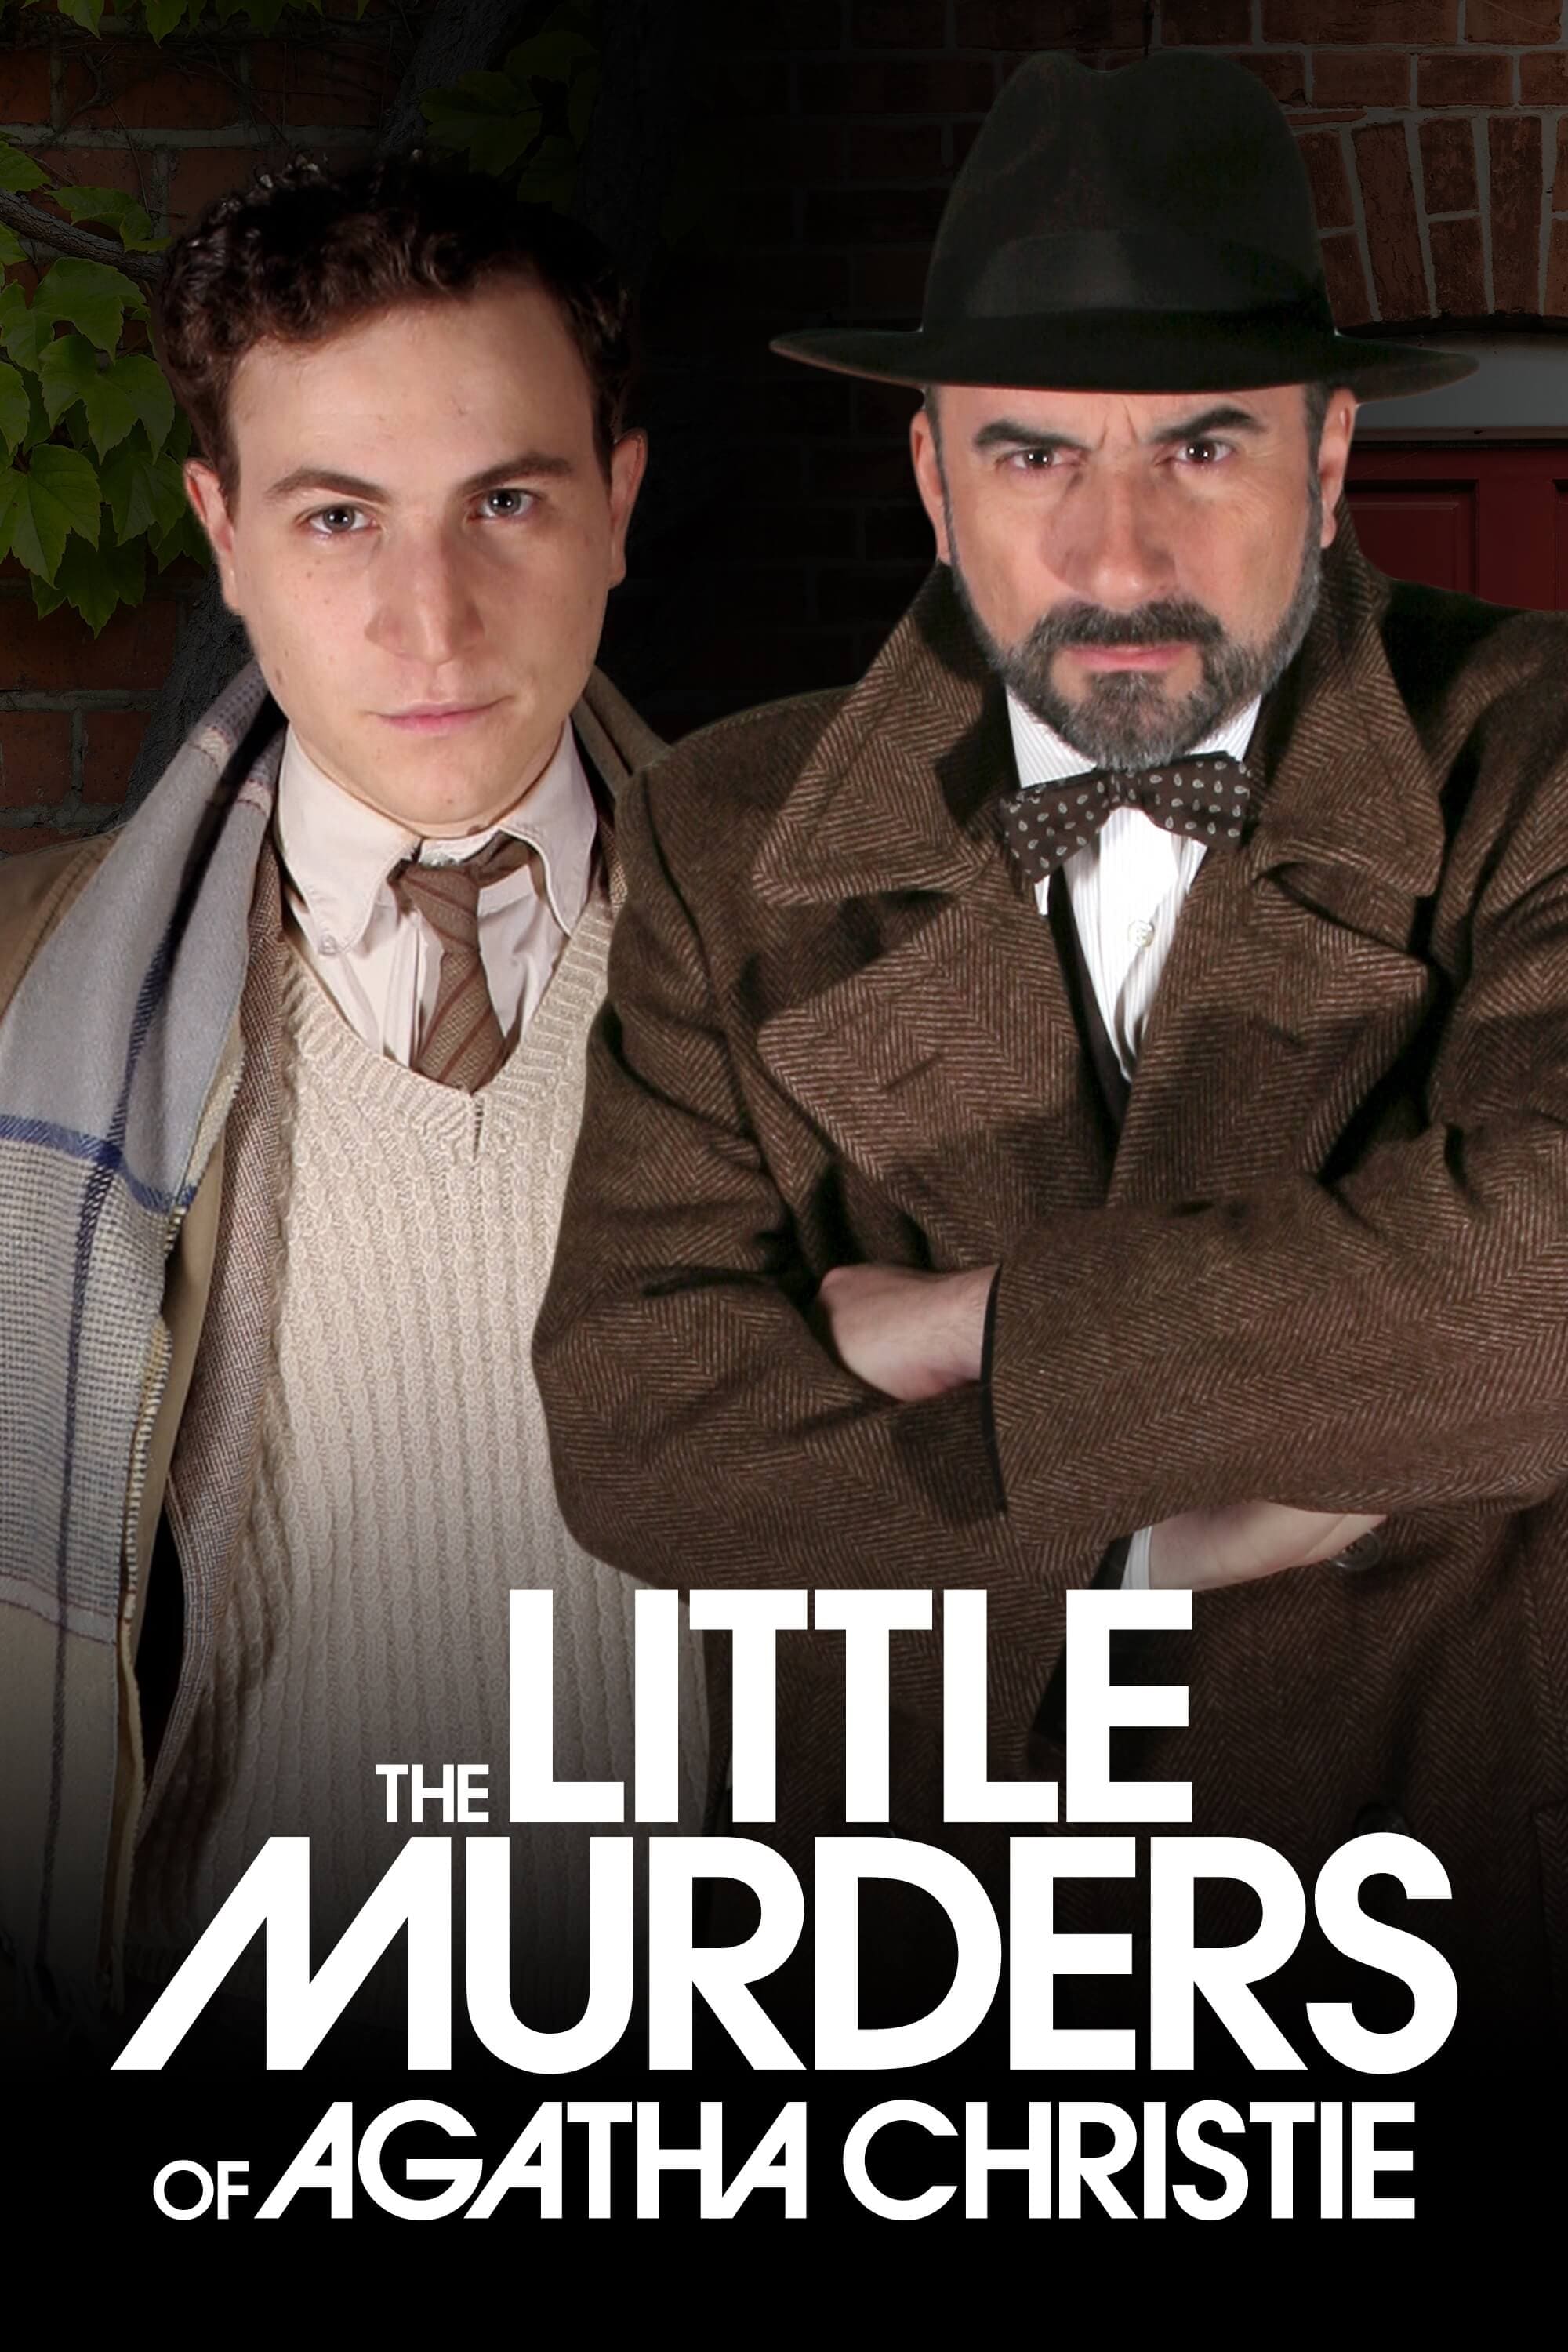 The Little Murders of Agatha Christie (2009)